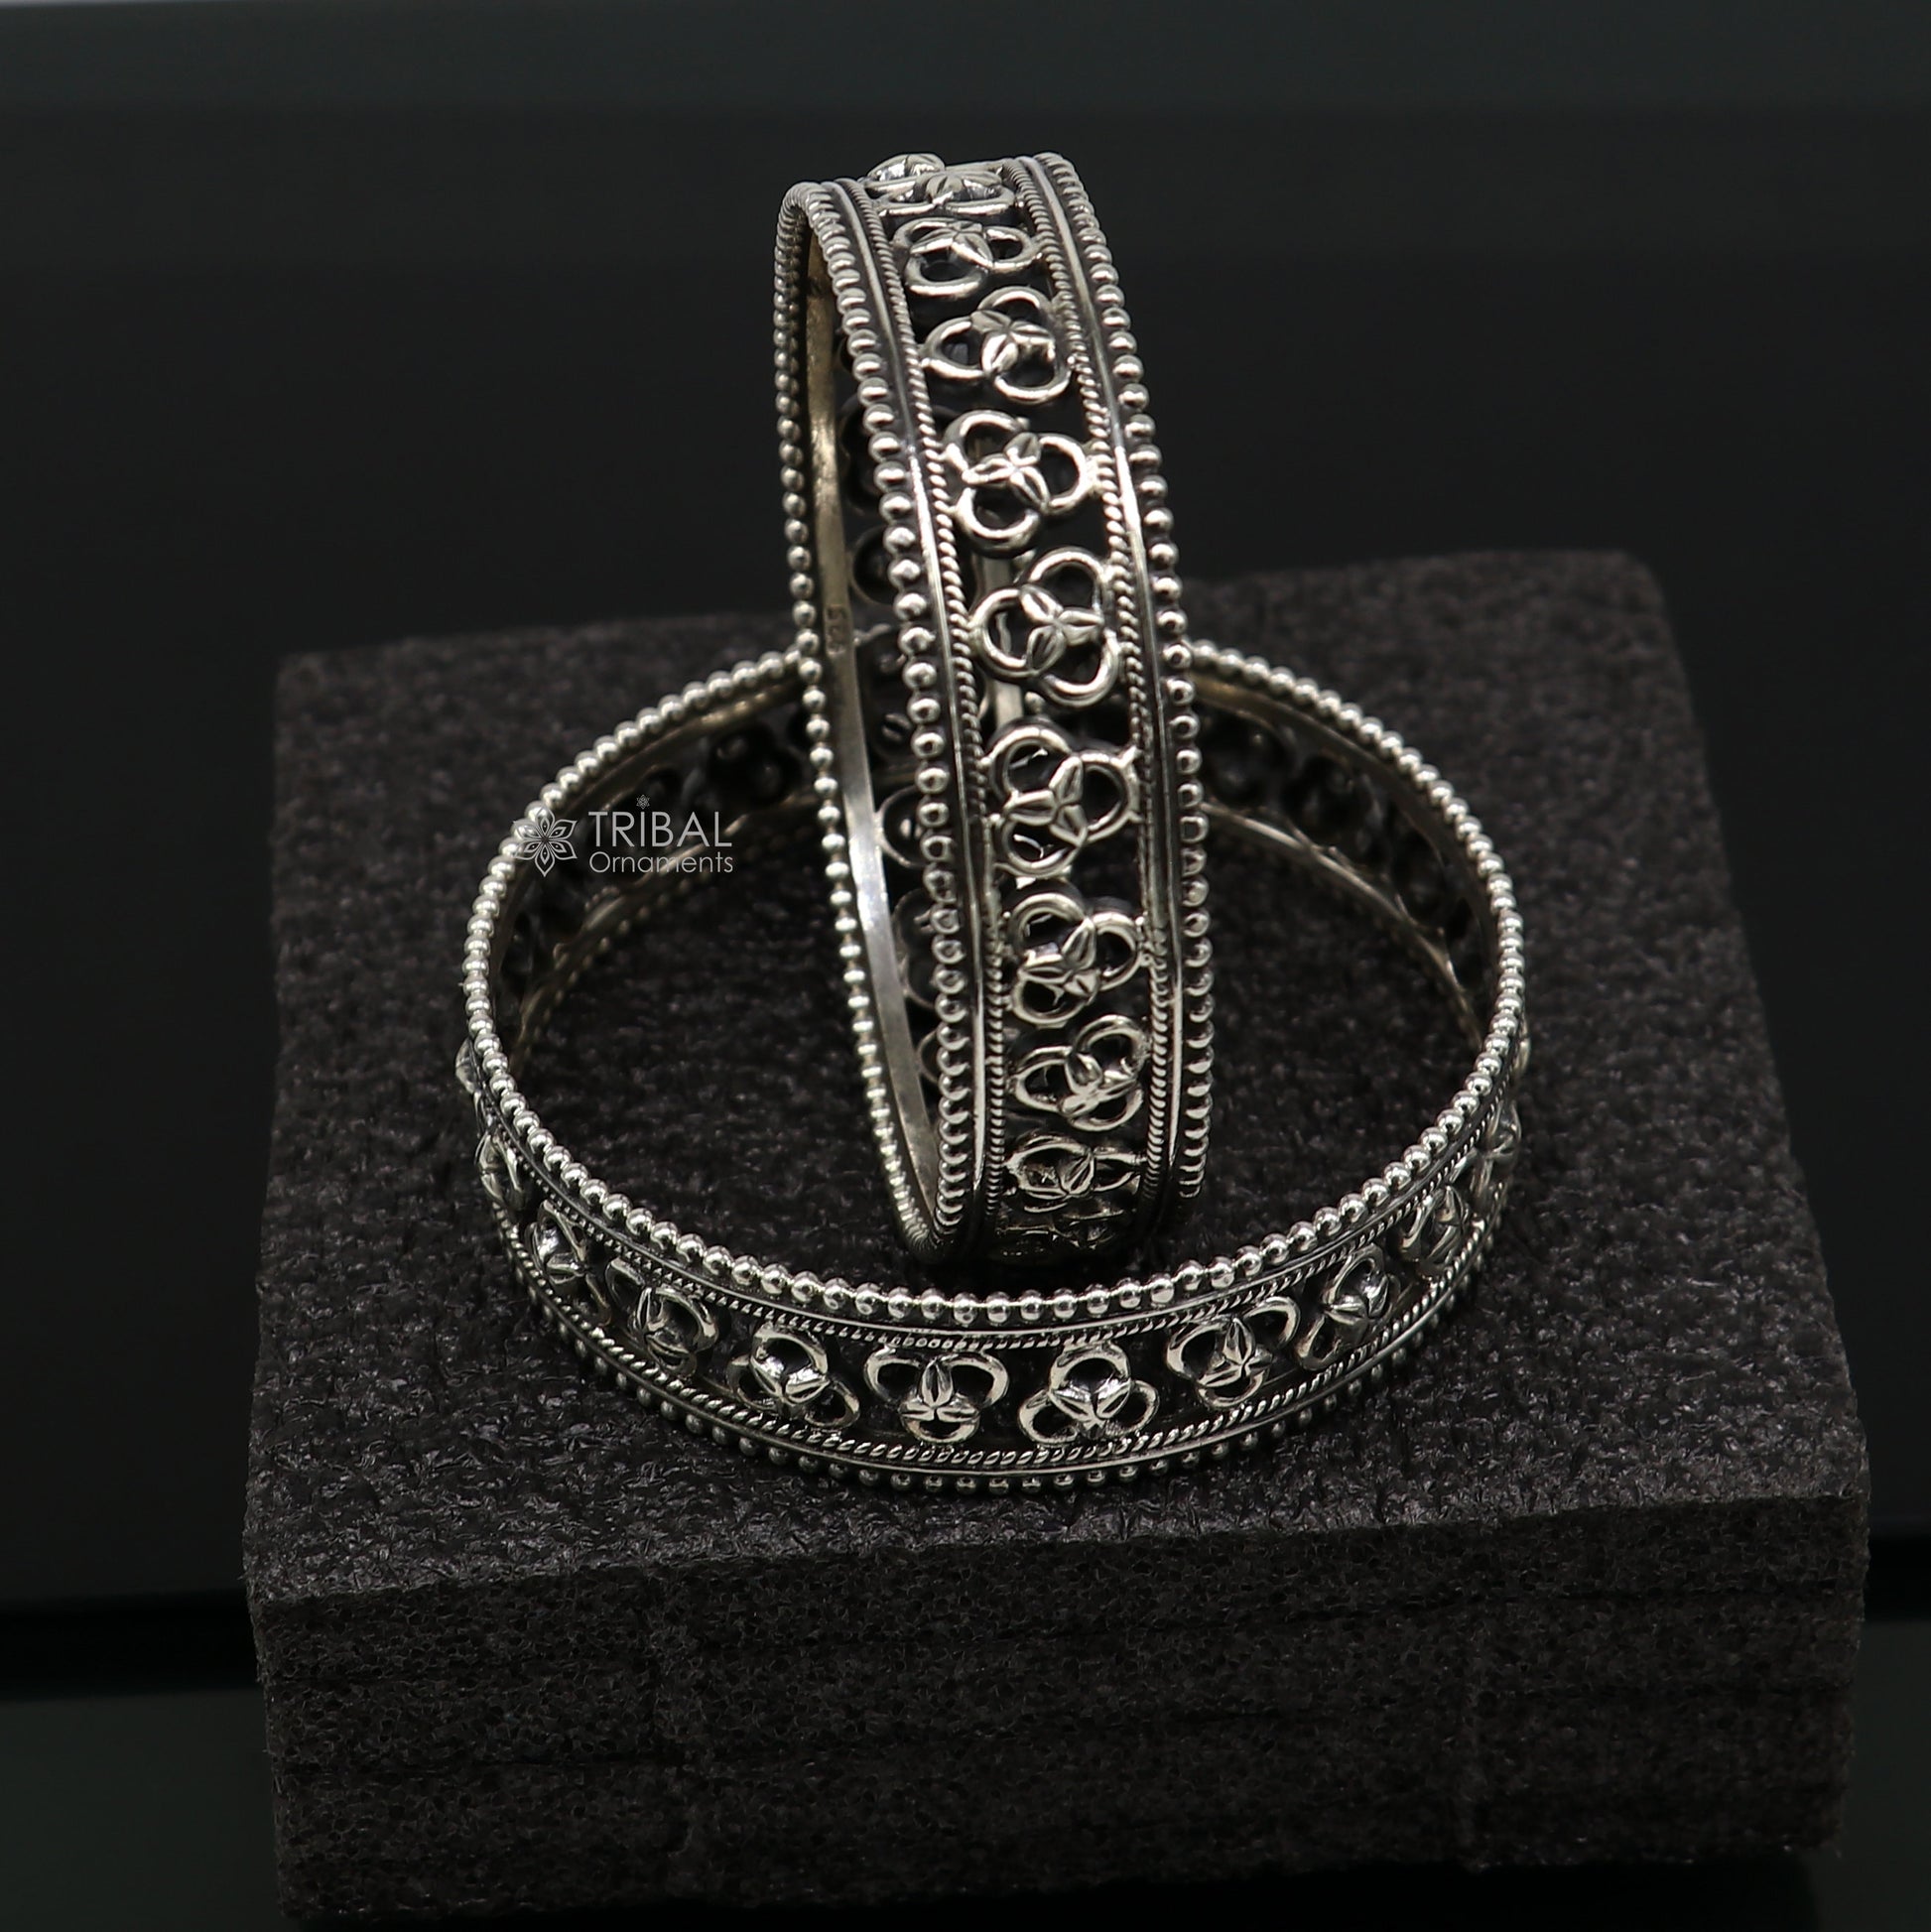 Trendy cultural design 925 sterling silver unique style handmade bangle bracelet , best brides collection wedding NAVRATRI jewelry nba401 - TRIBAL ORNAMENTS